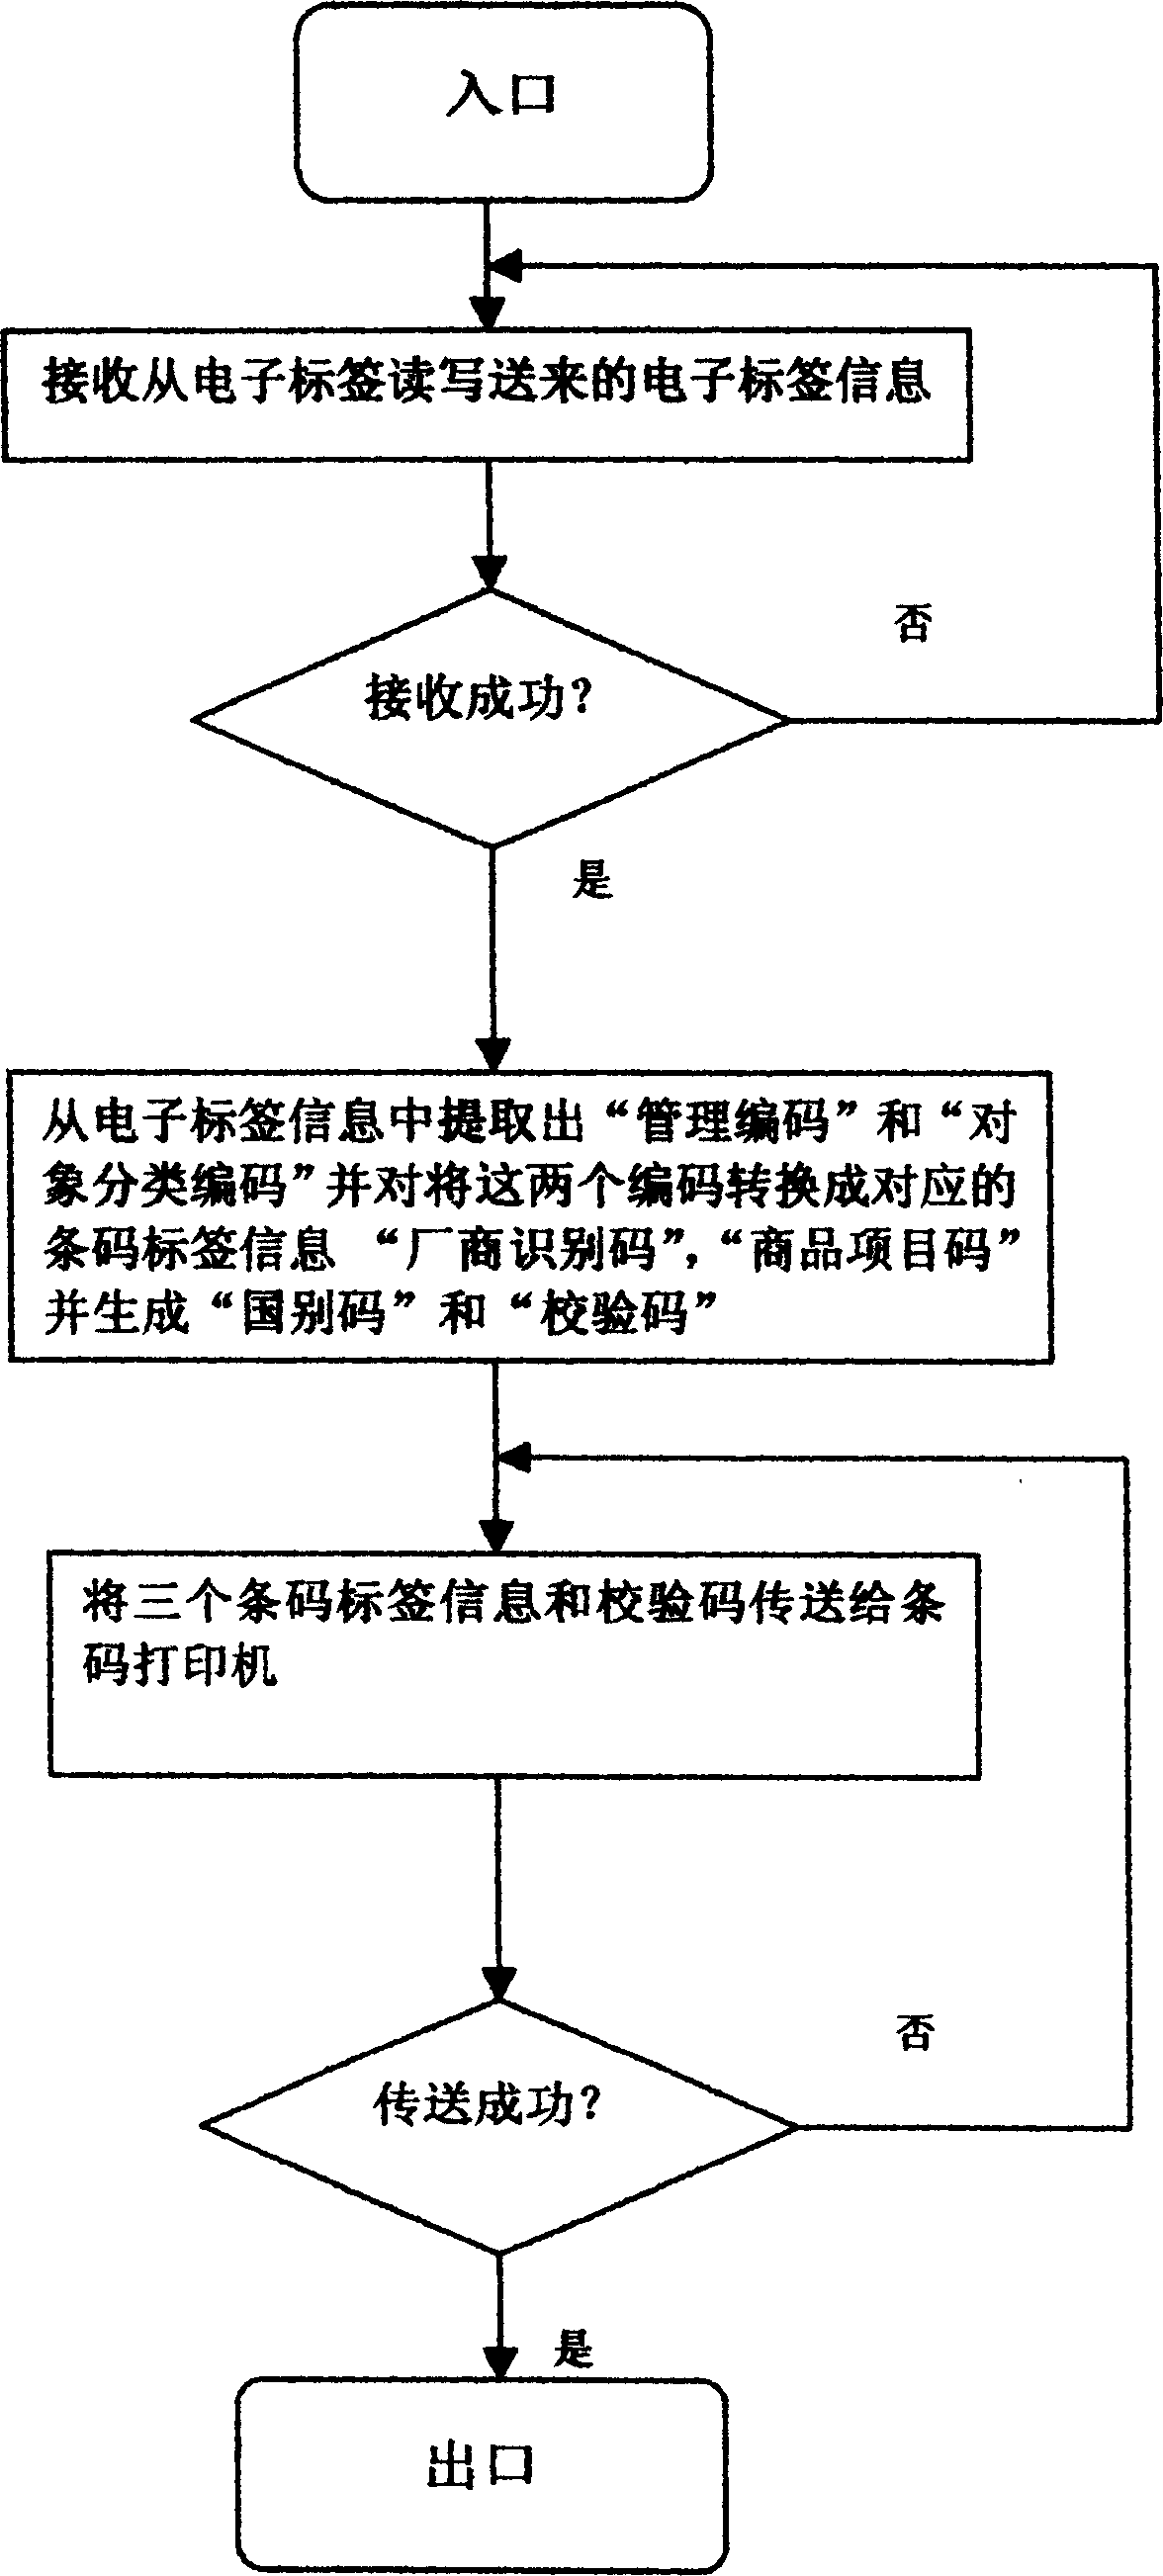 Label conversion generating method and used system